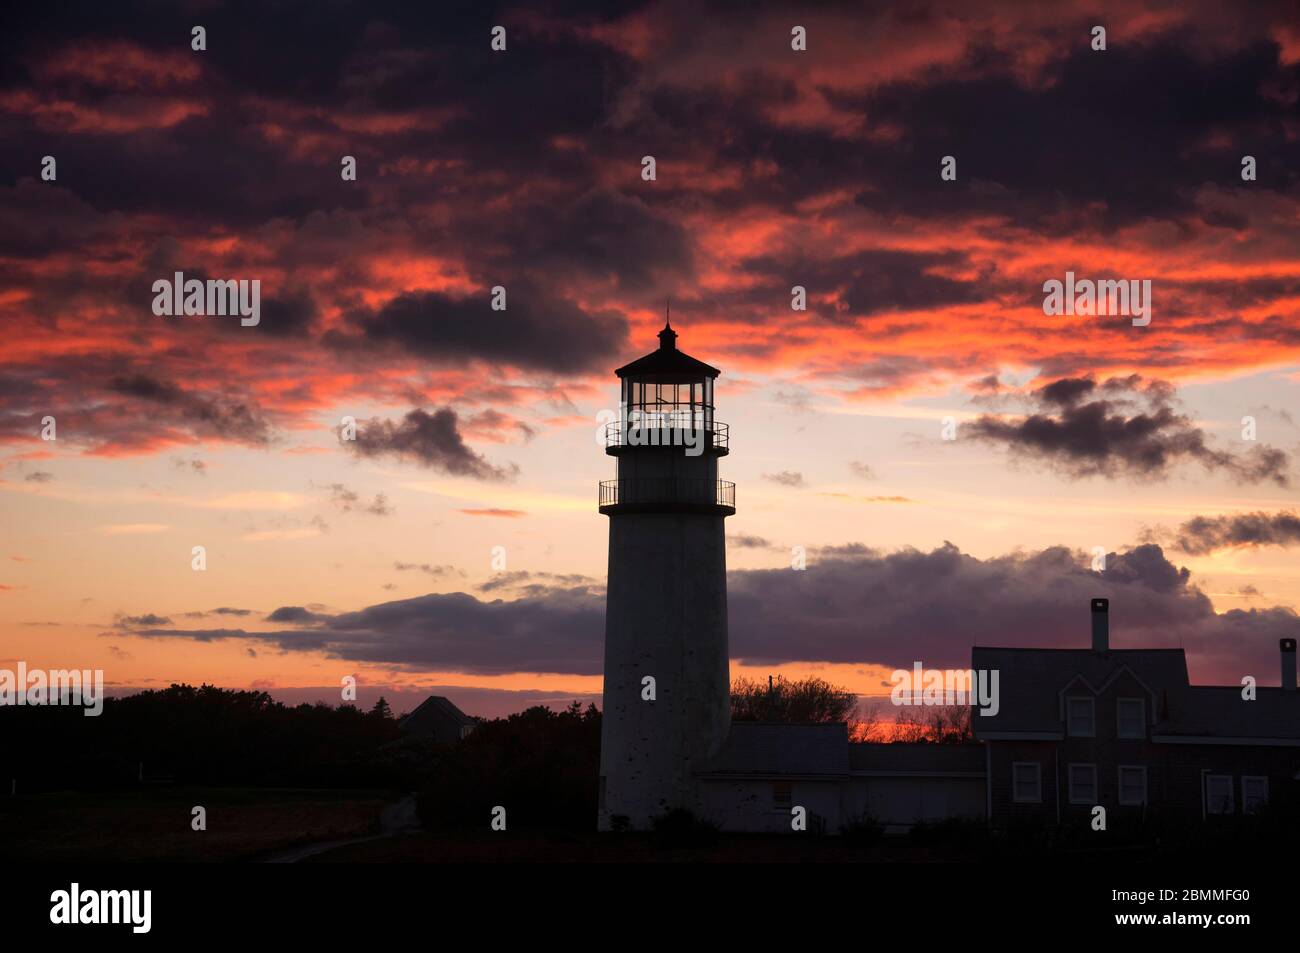 The highland lighthouse in north truro massachusetts on cape cod against a dramatic sunset sky built in 1857. Stock Photo